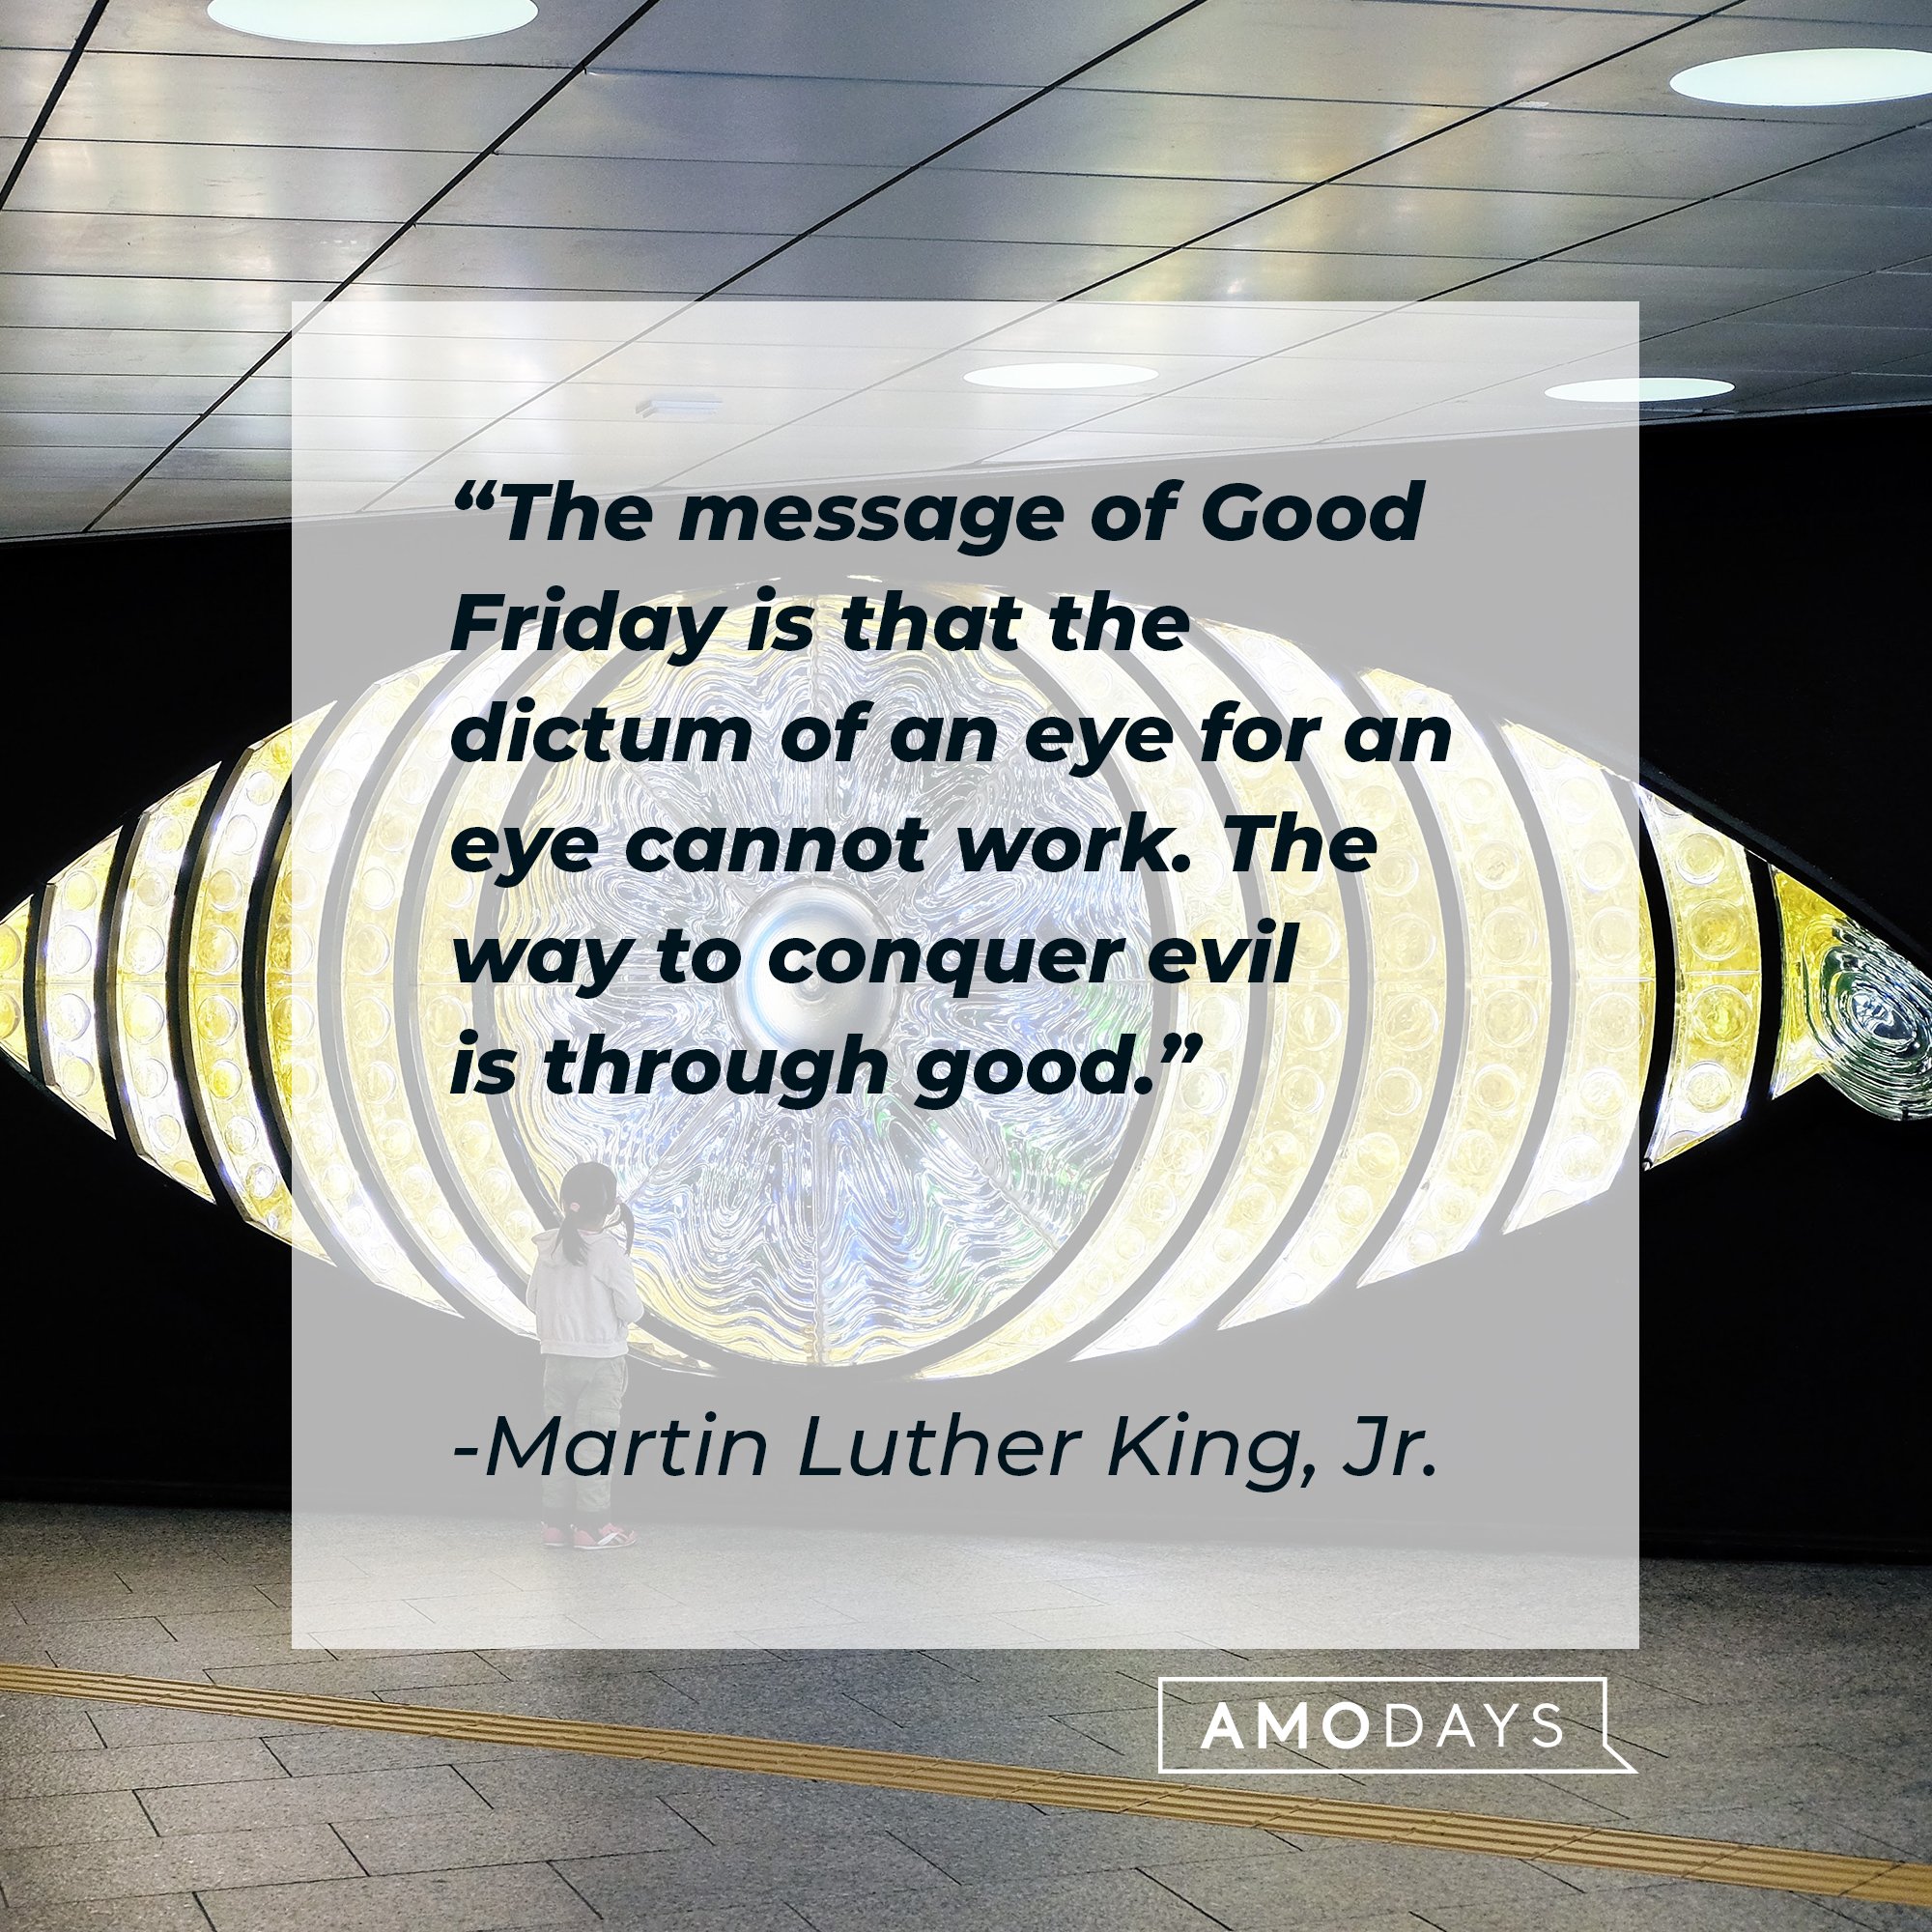 Martin Luther King, Jr.’s quote: "The message of Good Friday is that the dictum of an eye for an eye cannot work. The way to conquer evil is through good." | Image: AmoDays